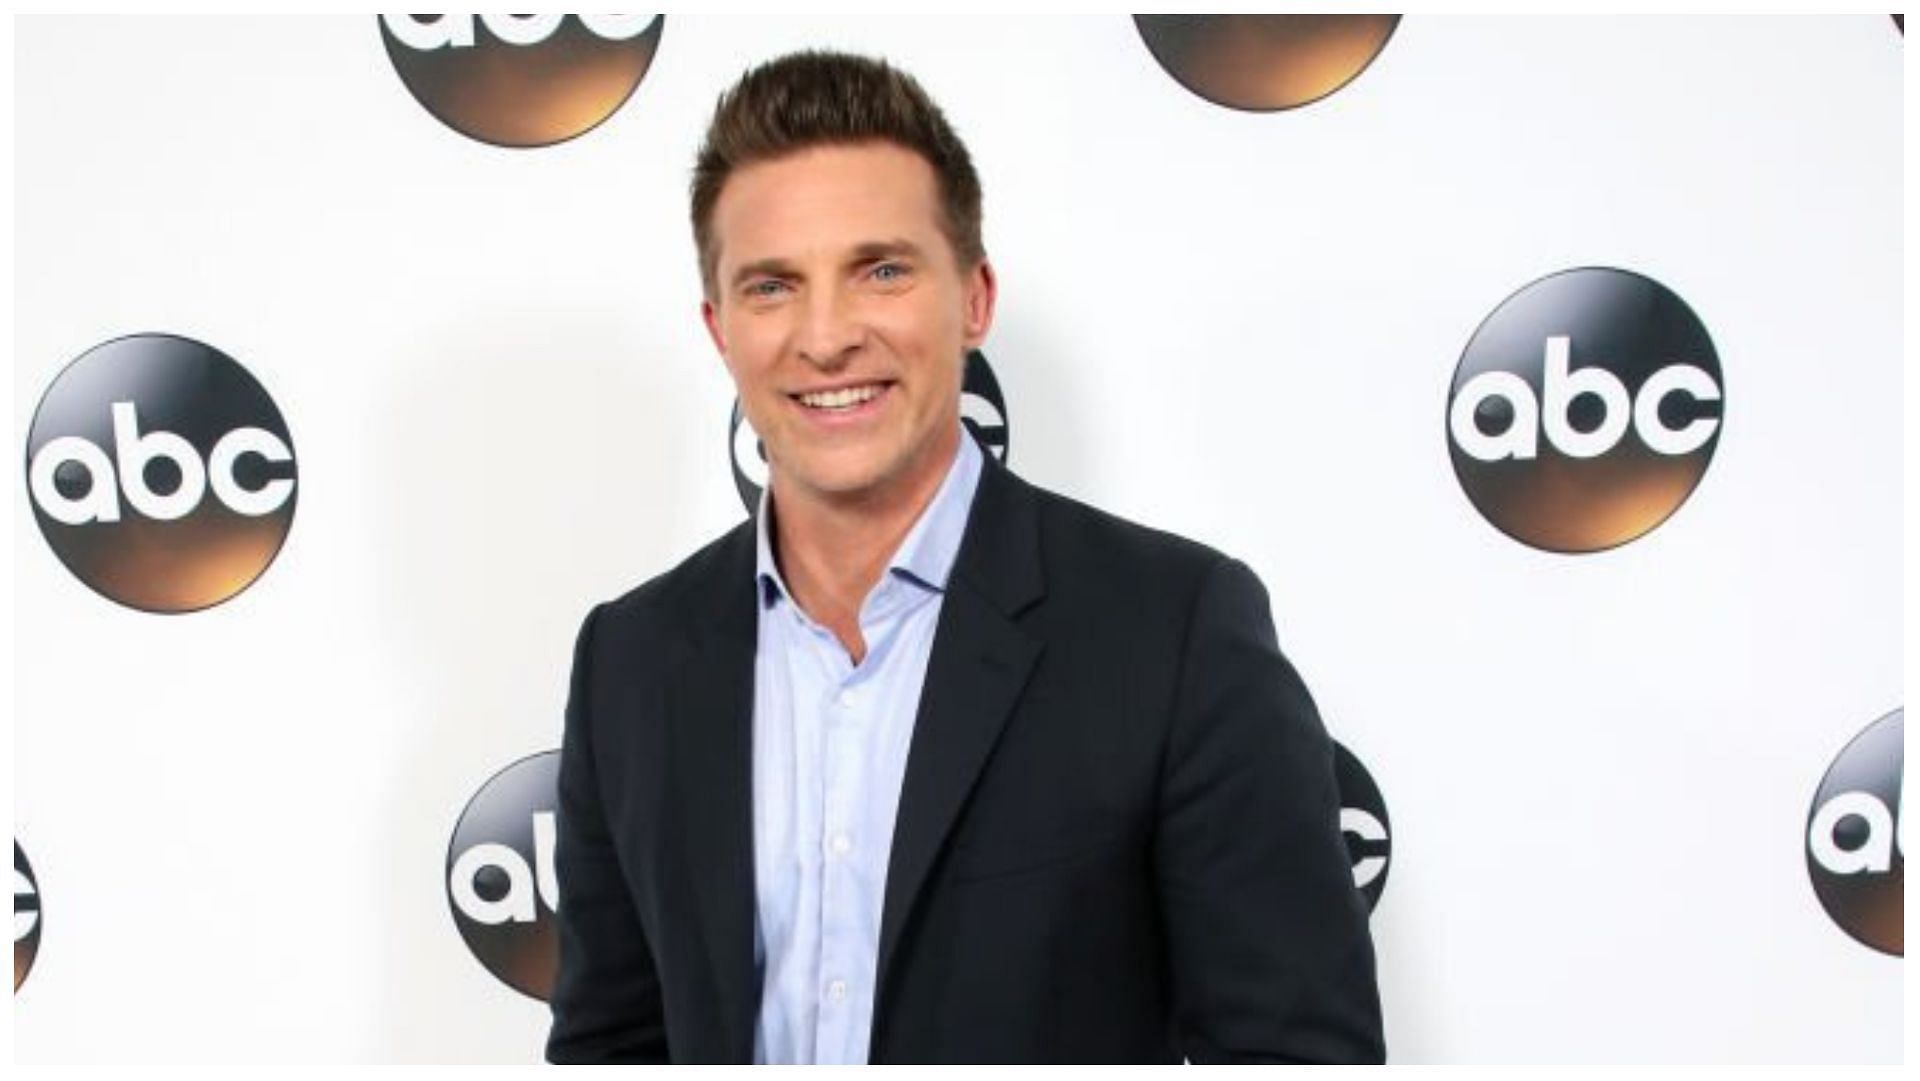 Steve Burton has accumulated a lot of wealth from his work in the entertainment industry (Image via David Livingston/Getty Images)